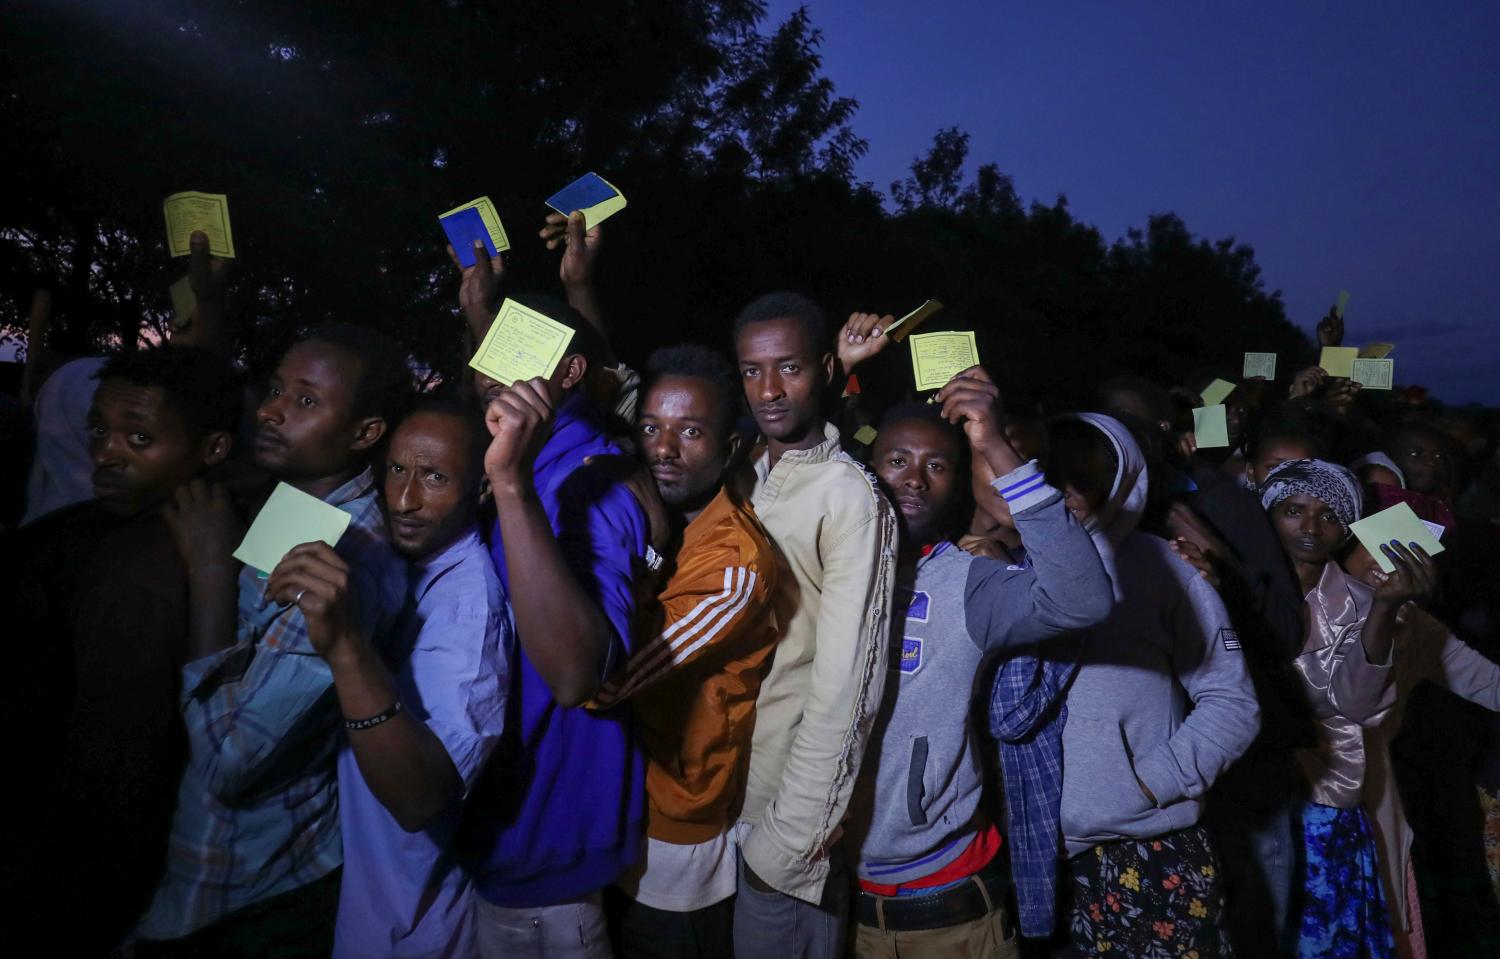 Voters wait in a queue to cast their vote during the Sidama autonomy referendum in Hawassa, Ethiopia November 20, 2019. REUTERS/Tiksa Negeri - RC2UED9FRFXH